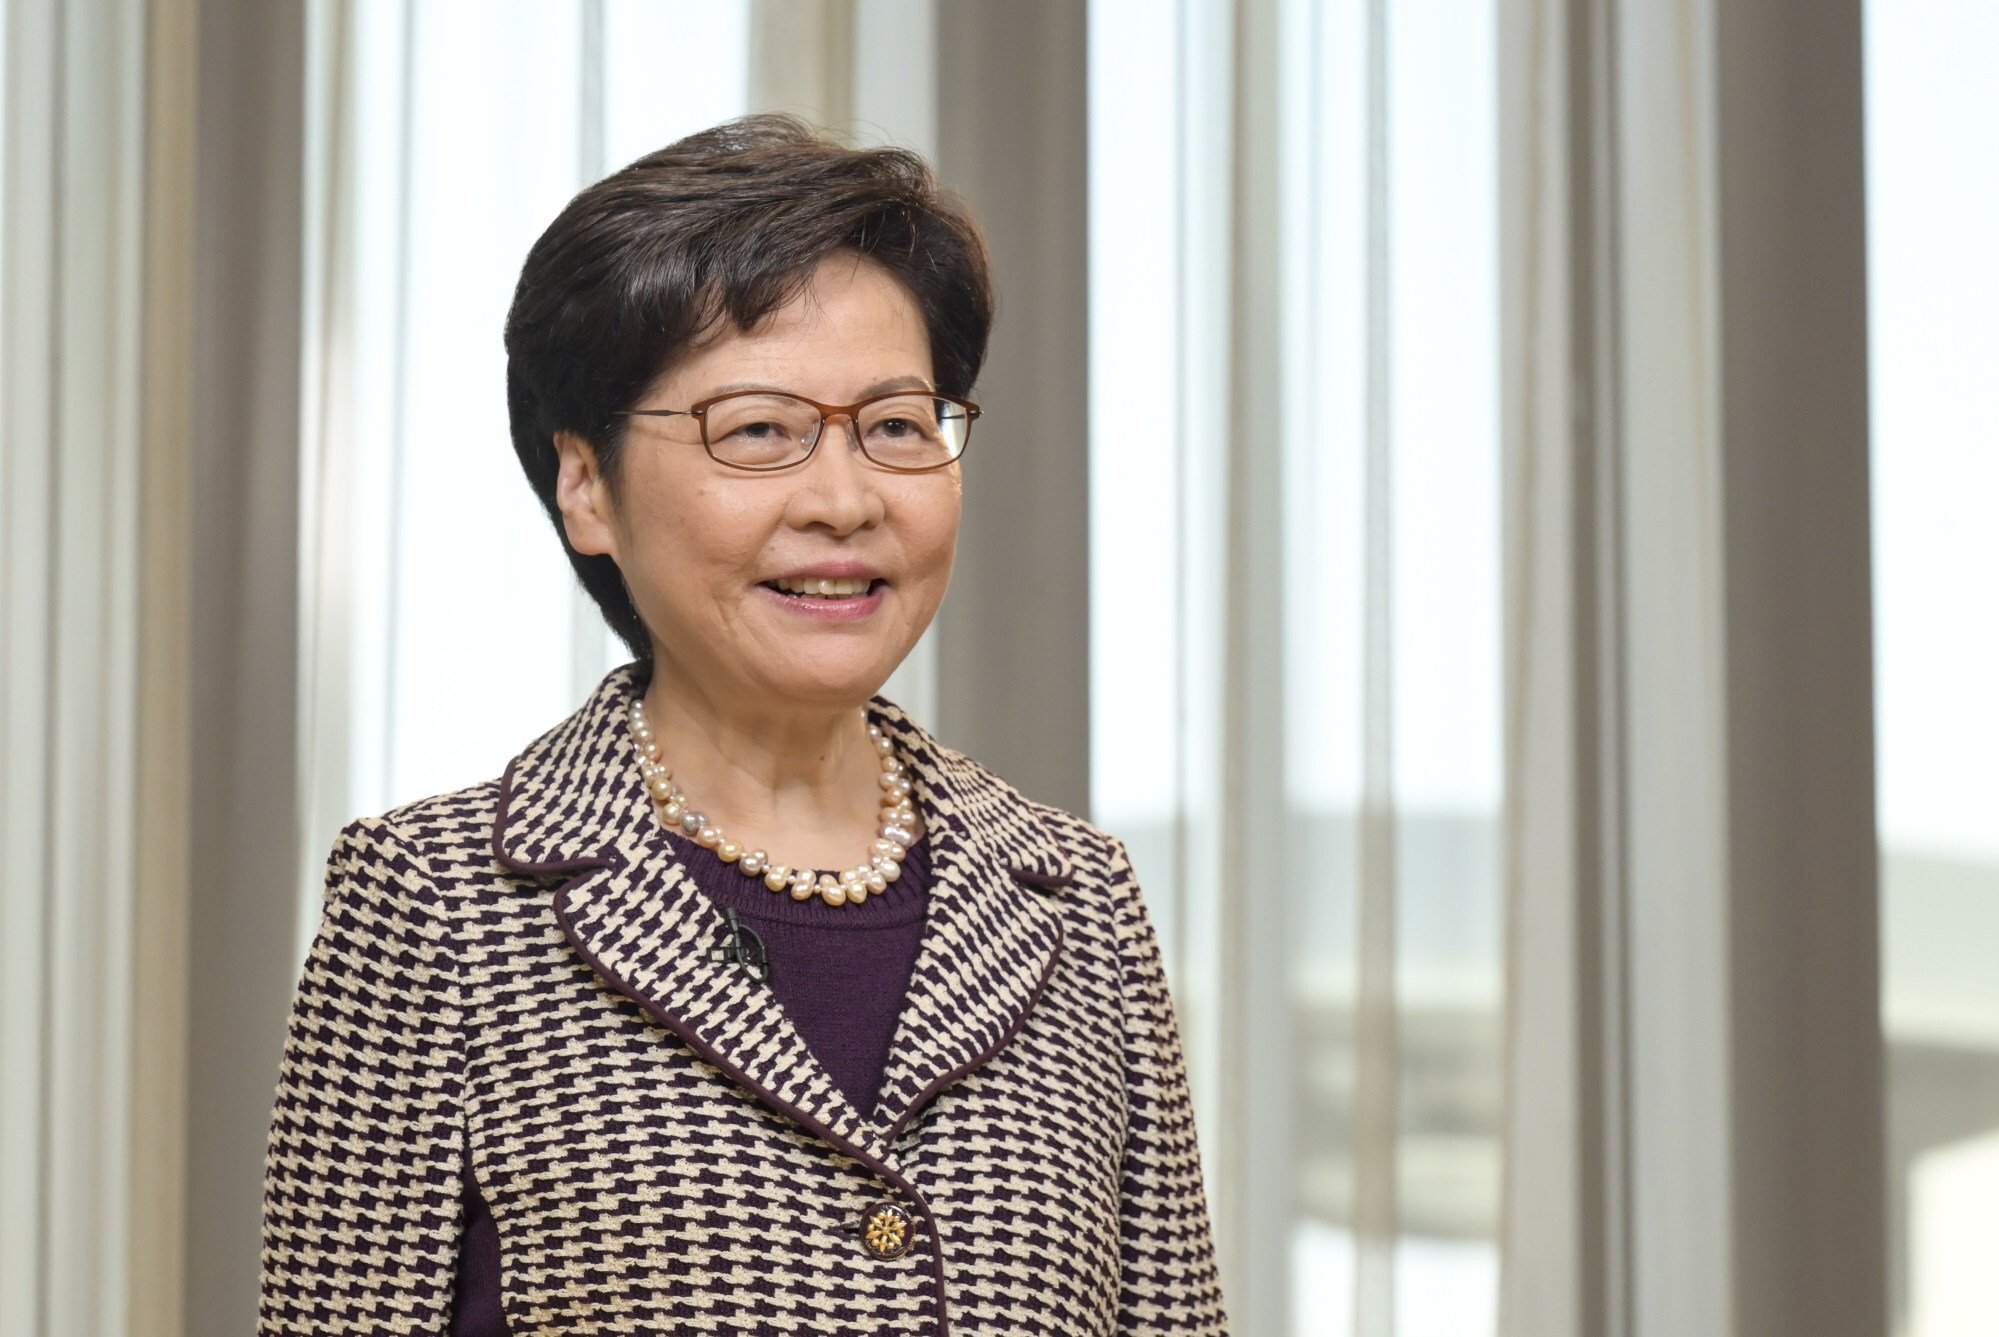 Carrie Lam became chief executive of Hong Kong in 2017 and has earned the nickname “tough fighter”. Photo: SCMP Archive